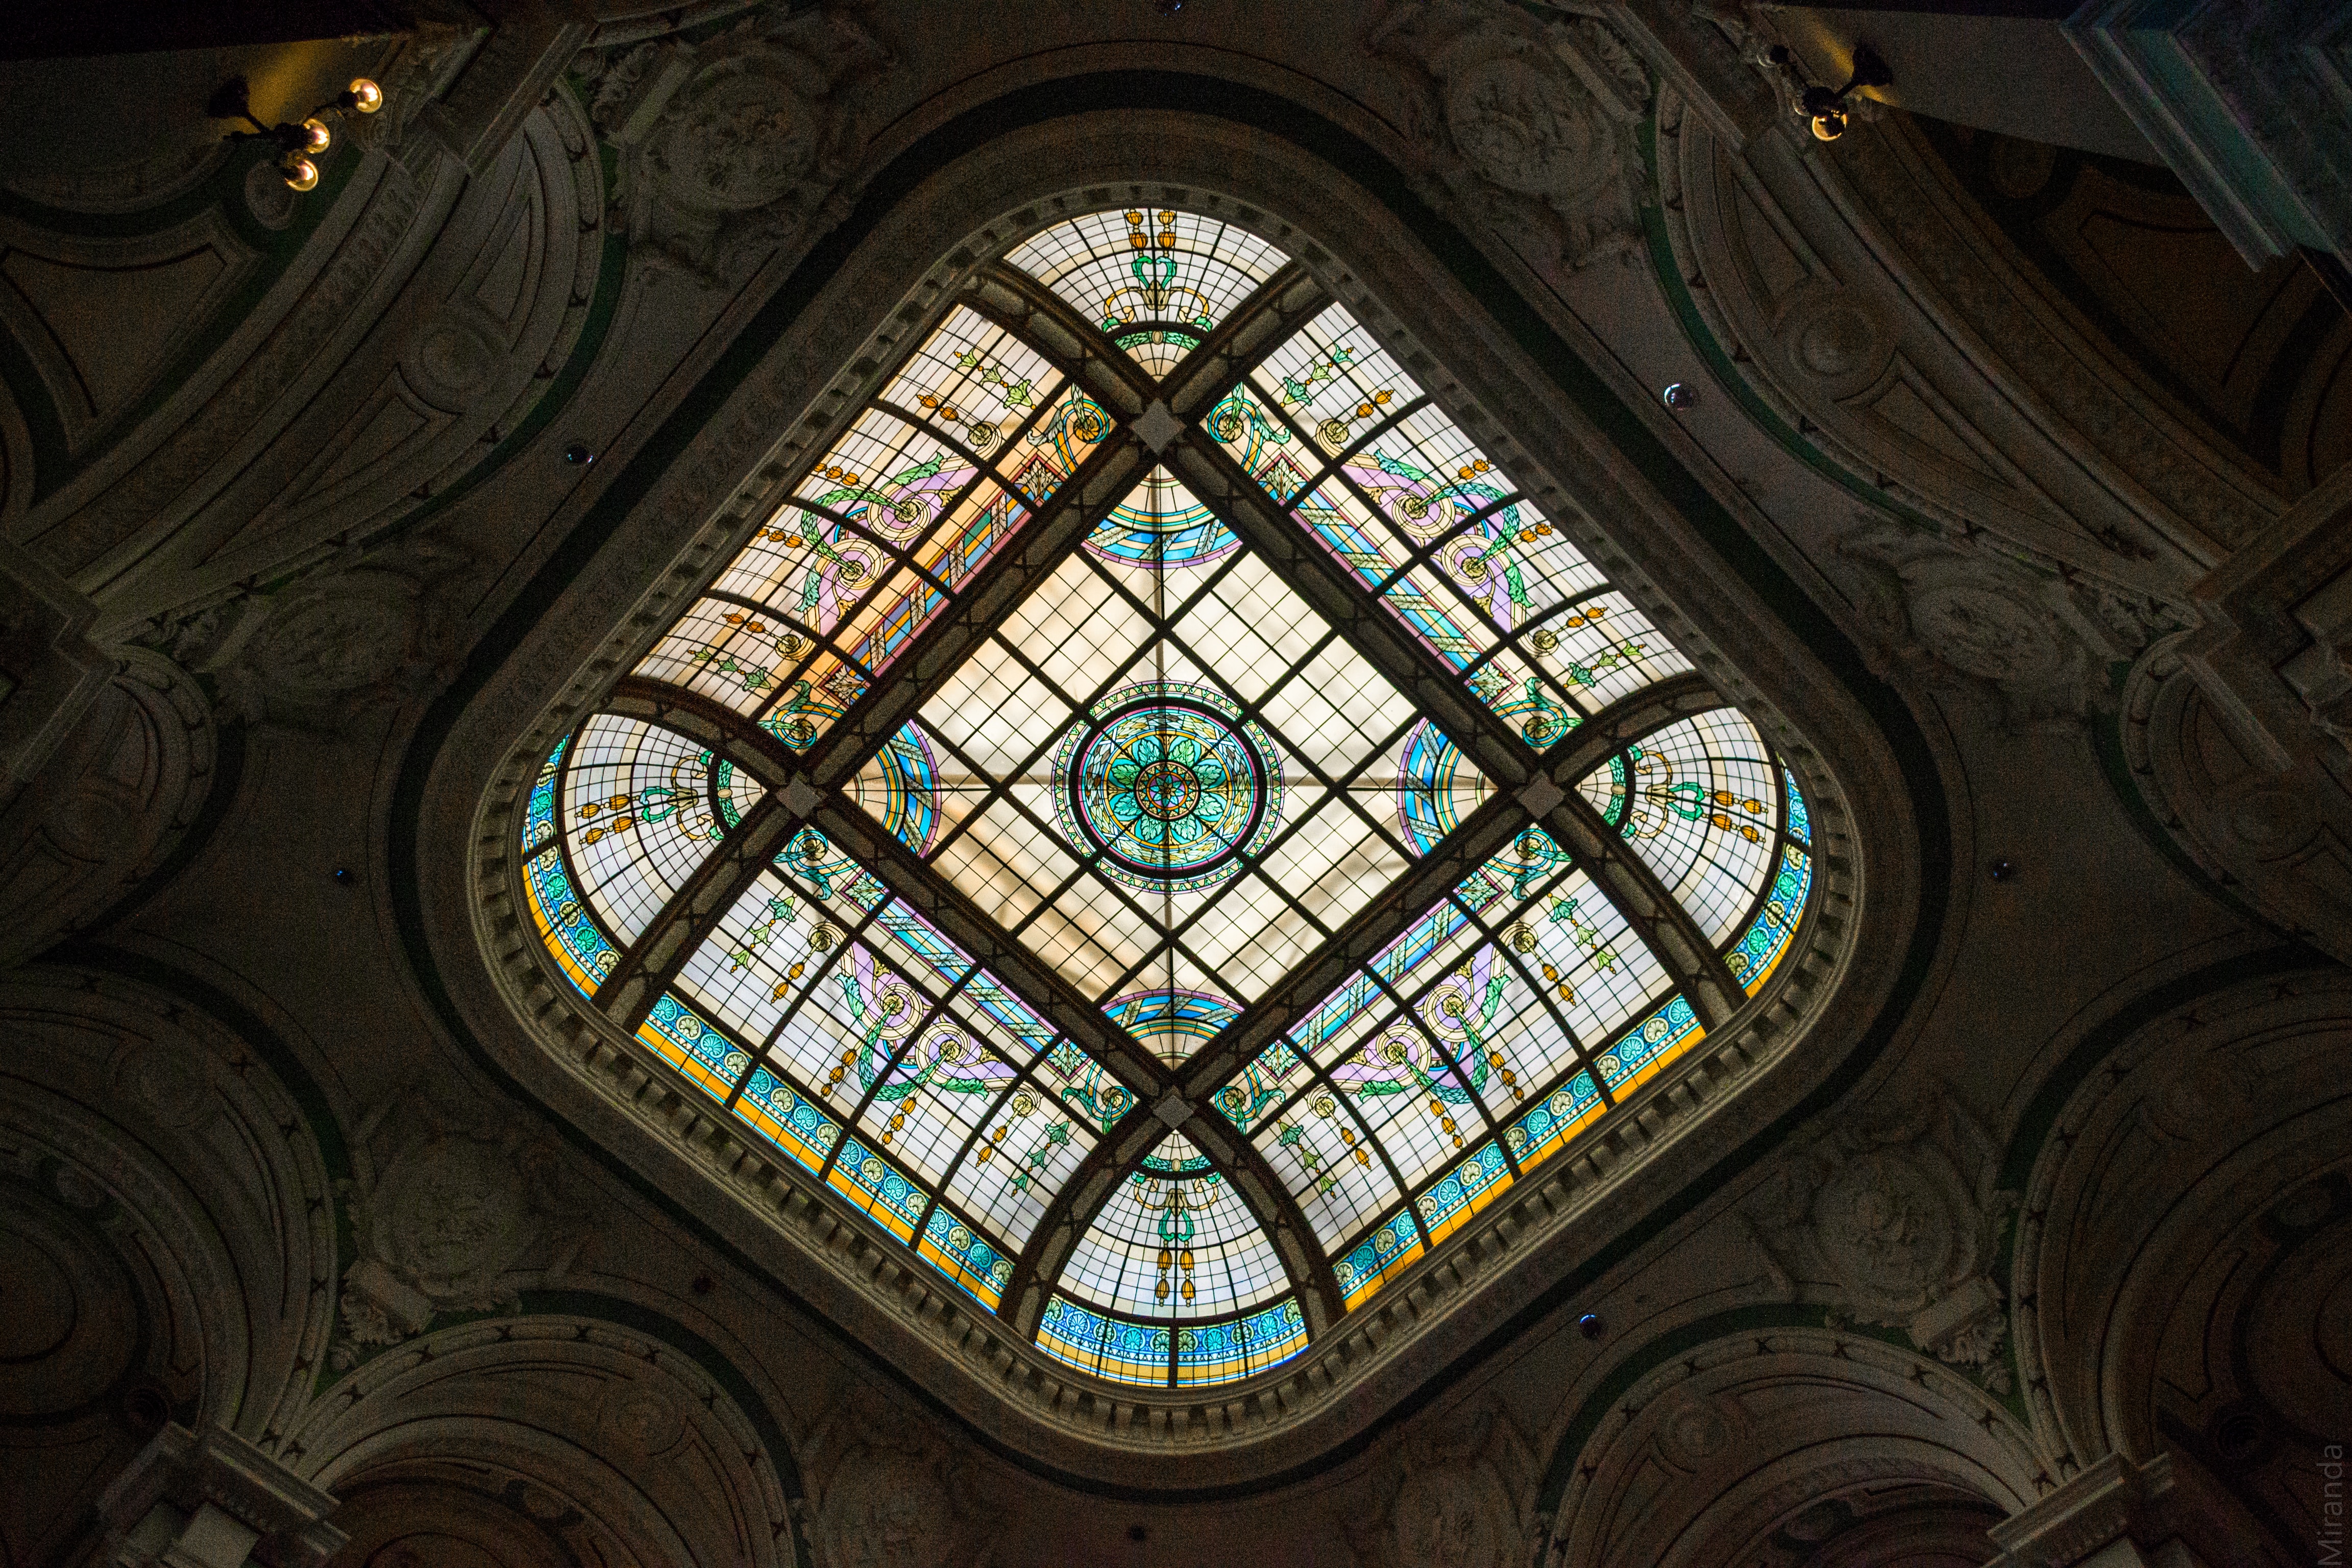 architecture, patterns, miscellanea, miscellaneous, dome, ceiling, stained glass, curtain wall